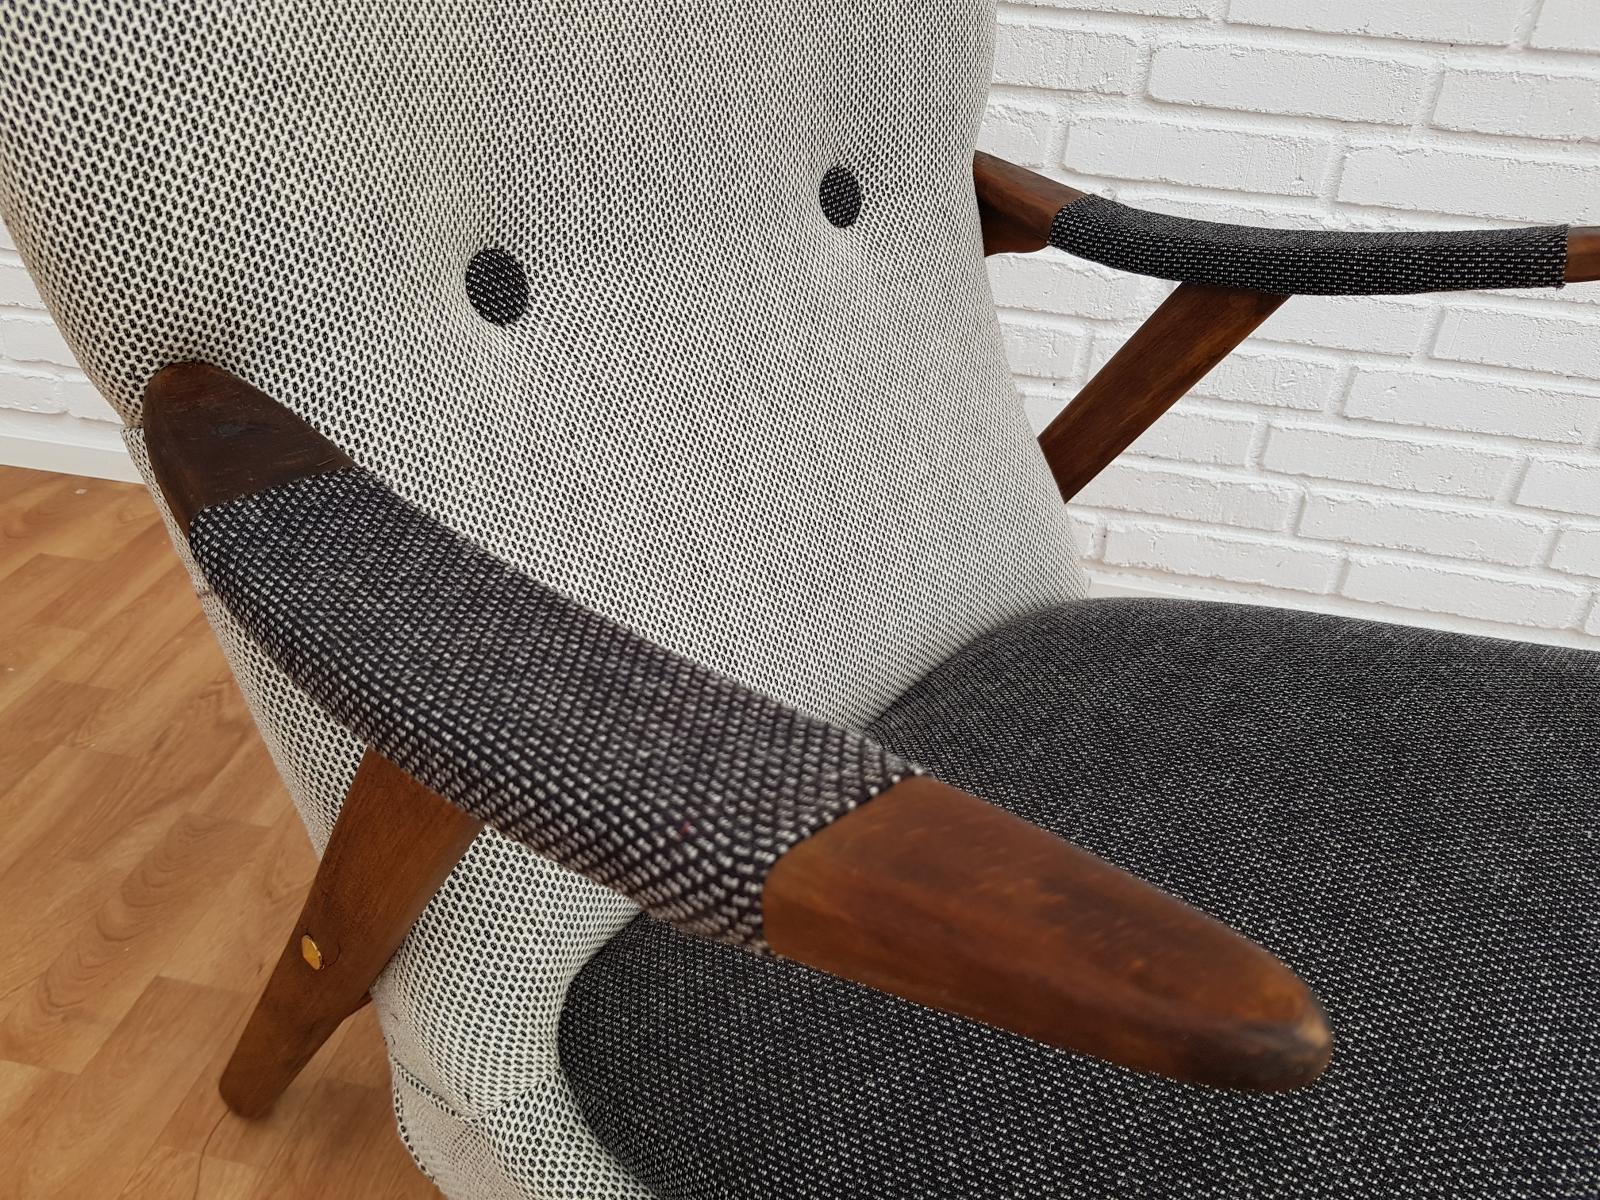 Armchair, Scandinavian design. Produced in 1960-1970. Legs and armrests of stained beech wood. Completely restored by craftsman, furniture upholsterer at Retro Møbler Galleri. Brand new padding with coconut mat. New reupholstered in quality wool